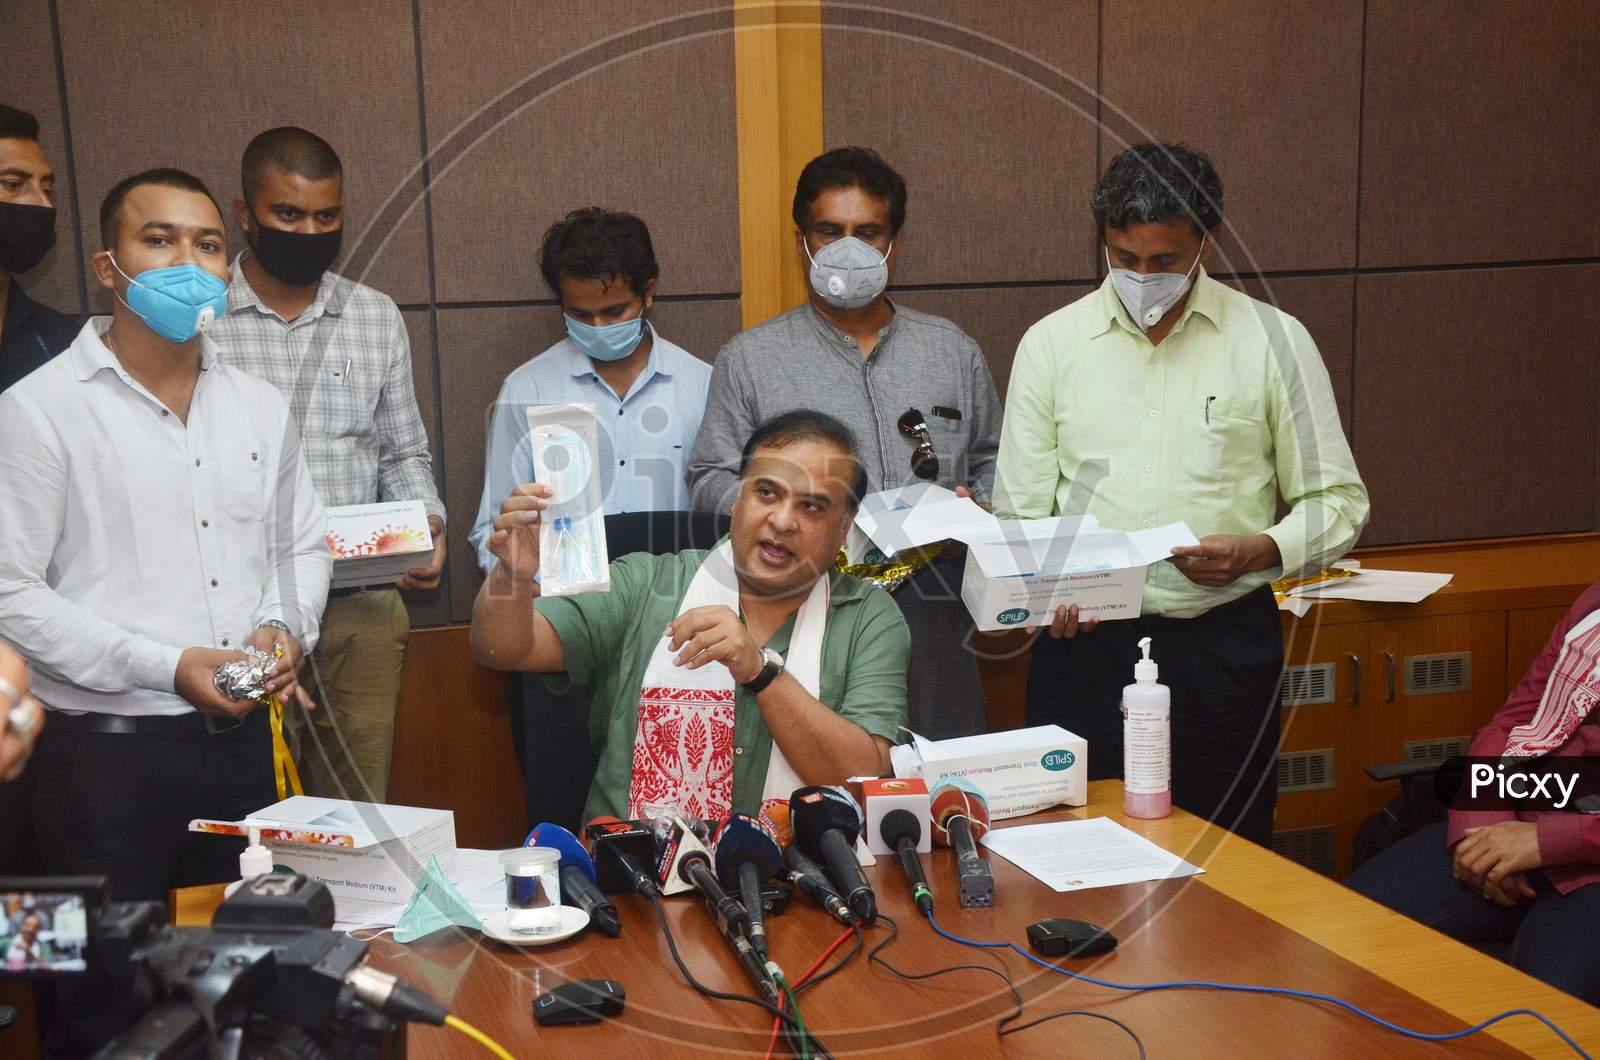 Assam State Minister Himanta Biswa Sarma speaks to media during the launch of the Viral Transport Media (VTM) kits, at Gauhati Medical College and Hospital (GMCH) in Guwahati, Wednesday, June 17, 2020.